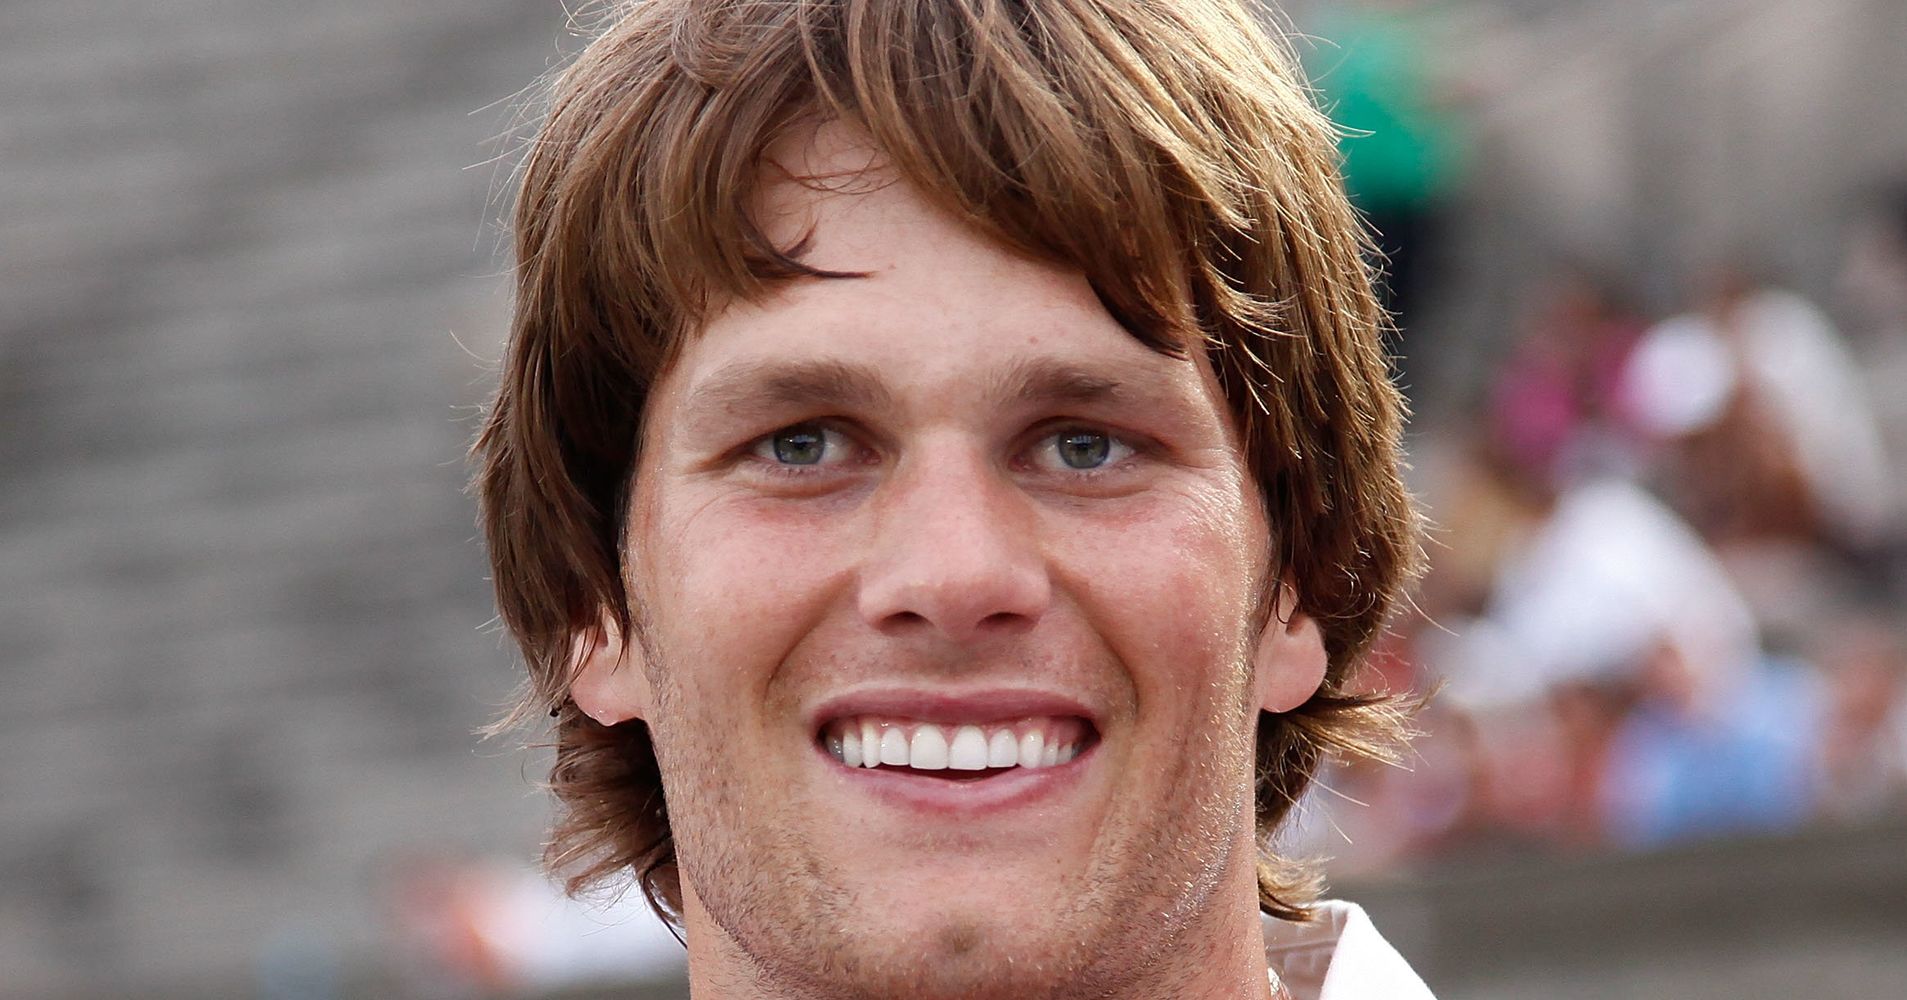 Tom Brady Has Had Way More Hairstyles Than Super Bowl Wins | HuffPost1907 x 1000